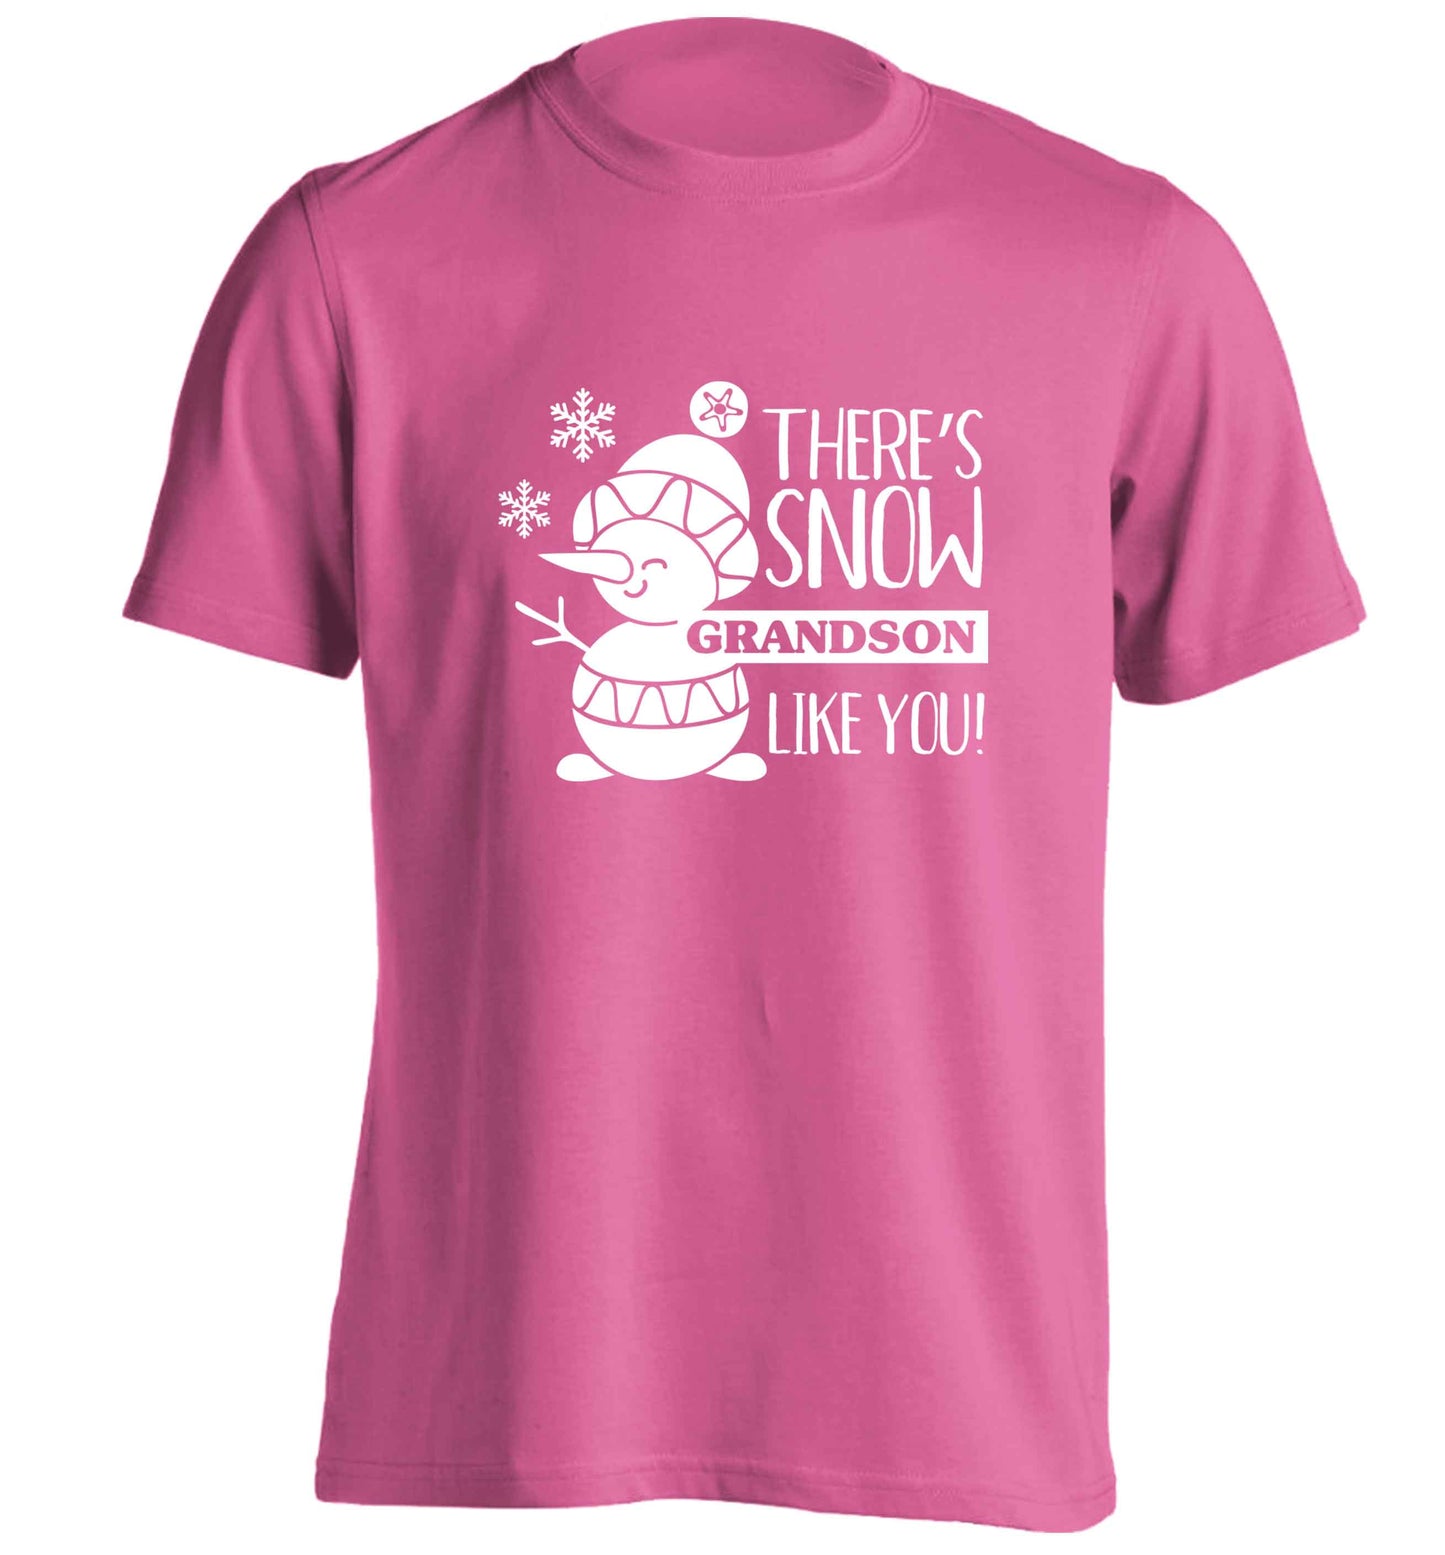 There's snow grandson like you adults unisex pink Tshirt 2XL